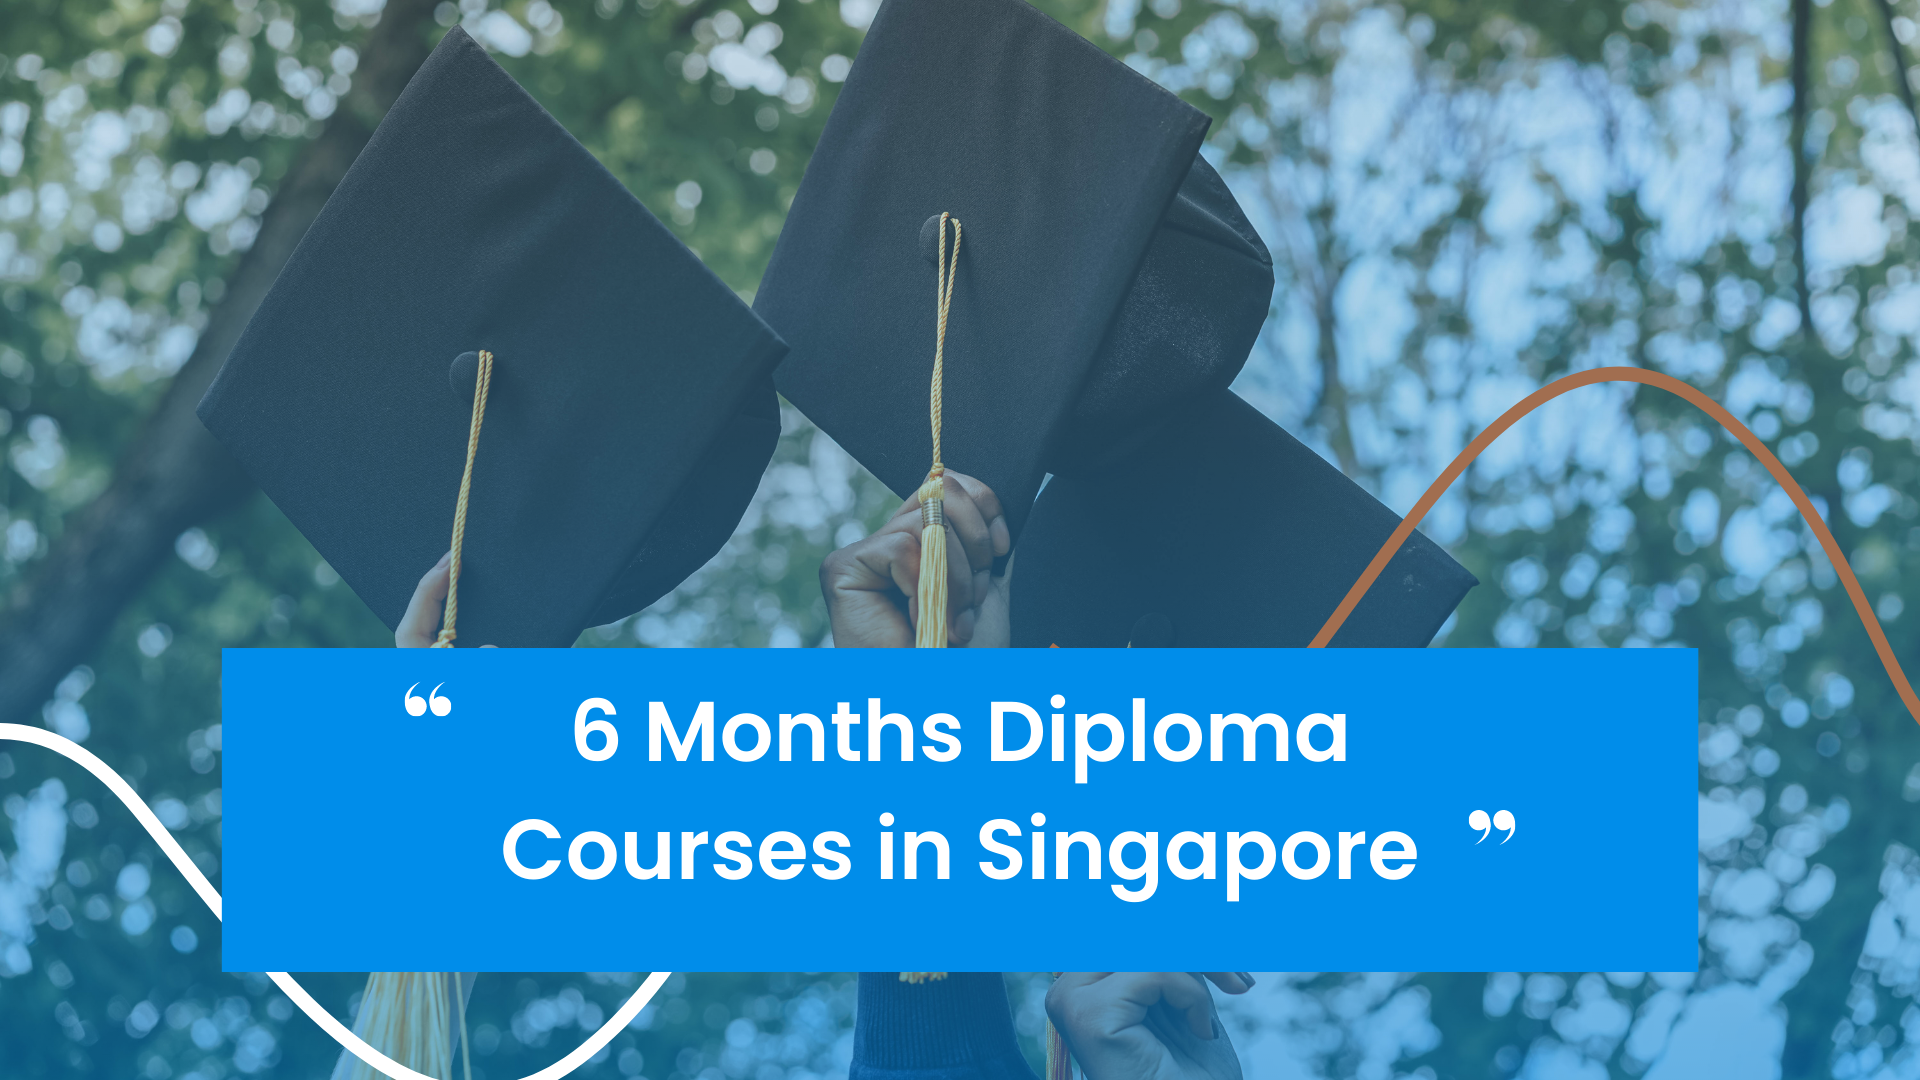 6 Months Diploma Courses in Singapore